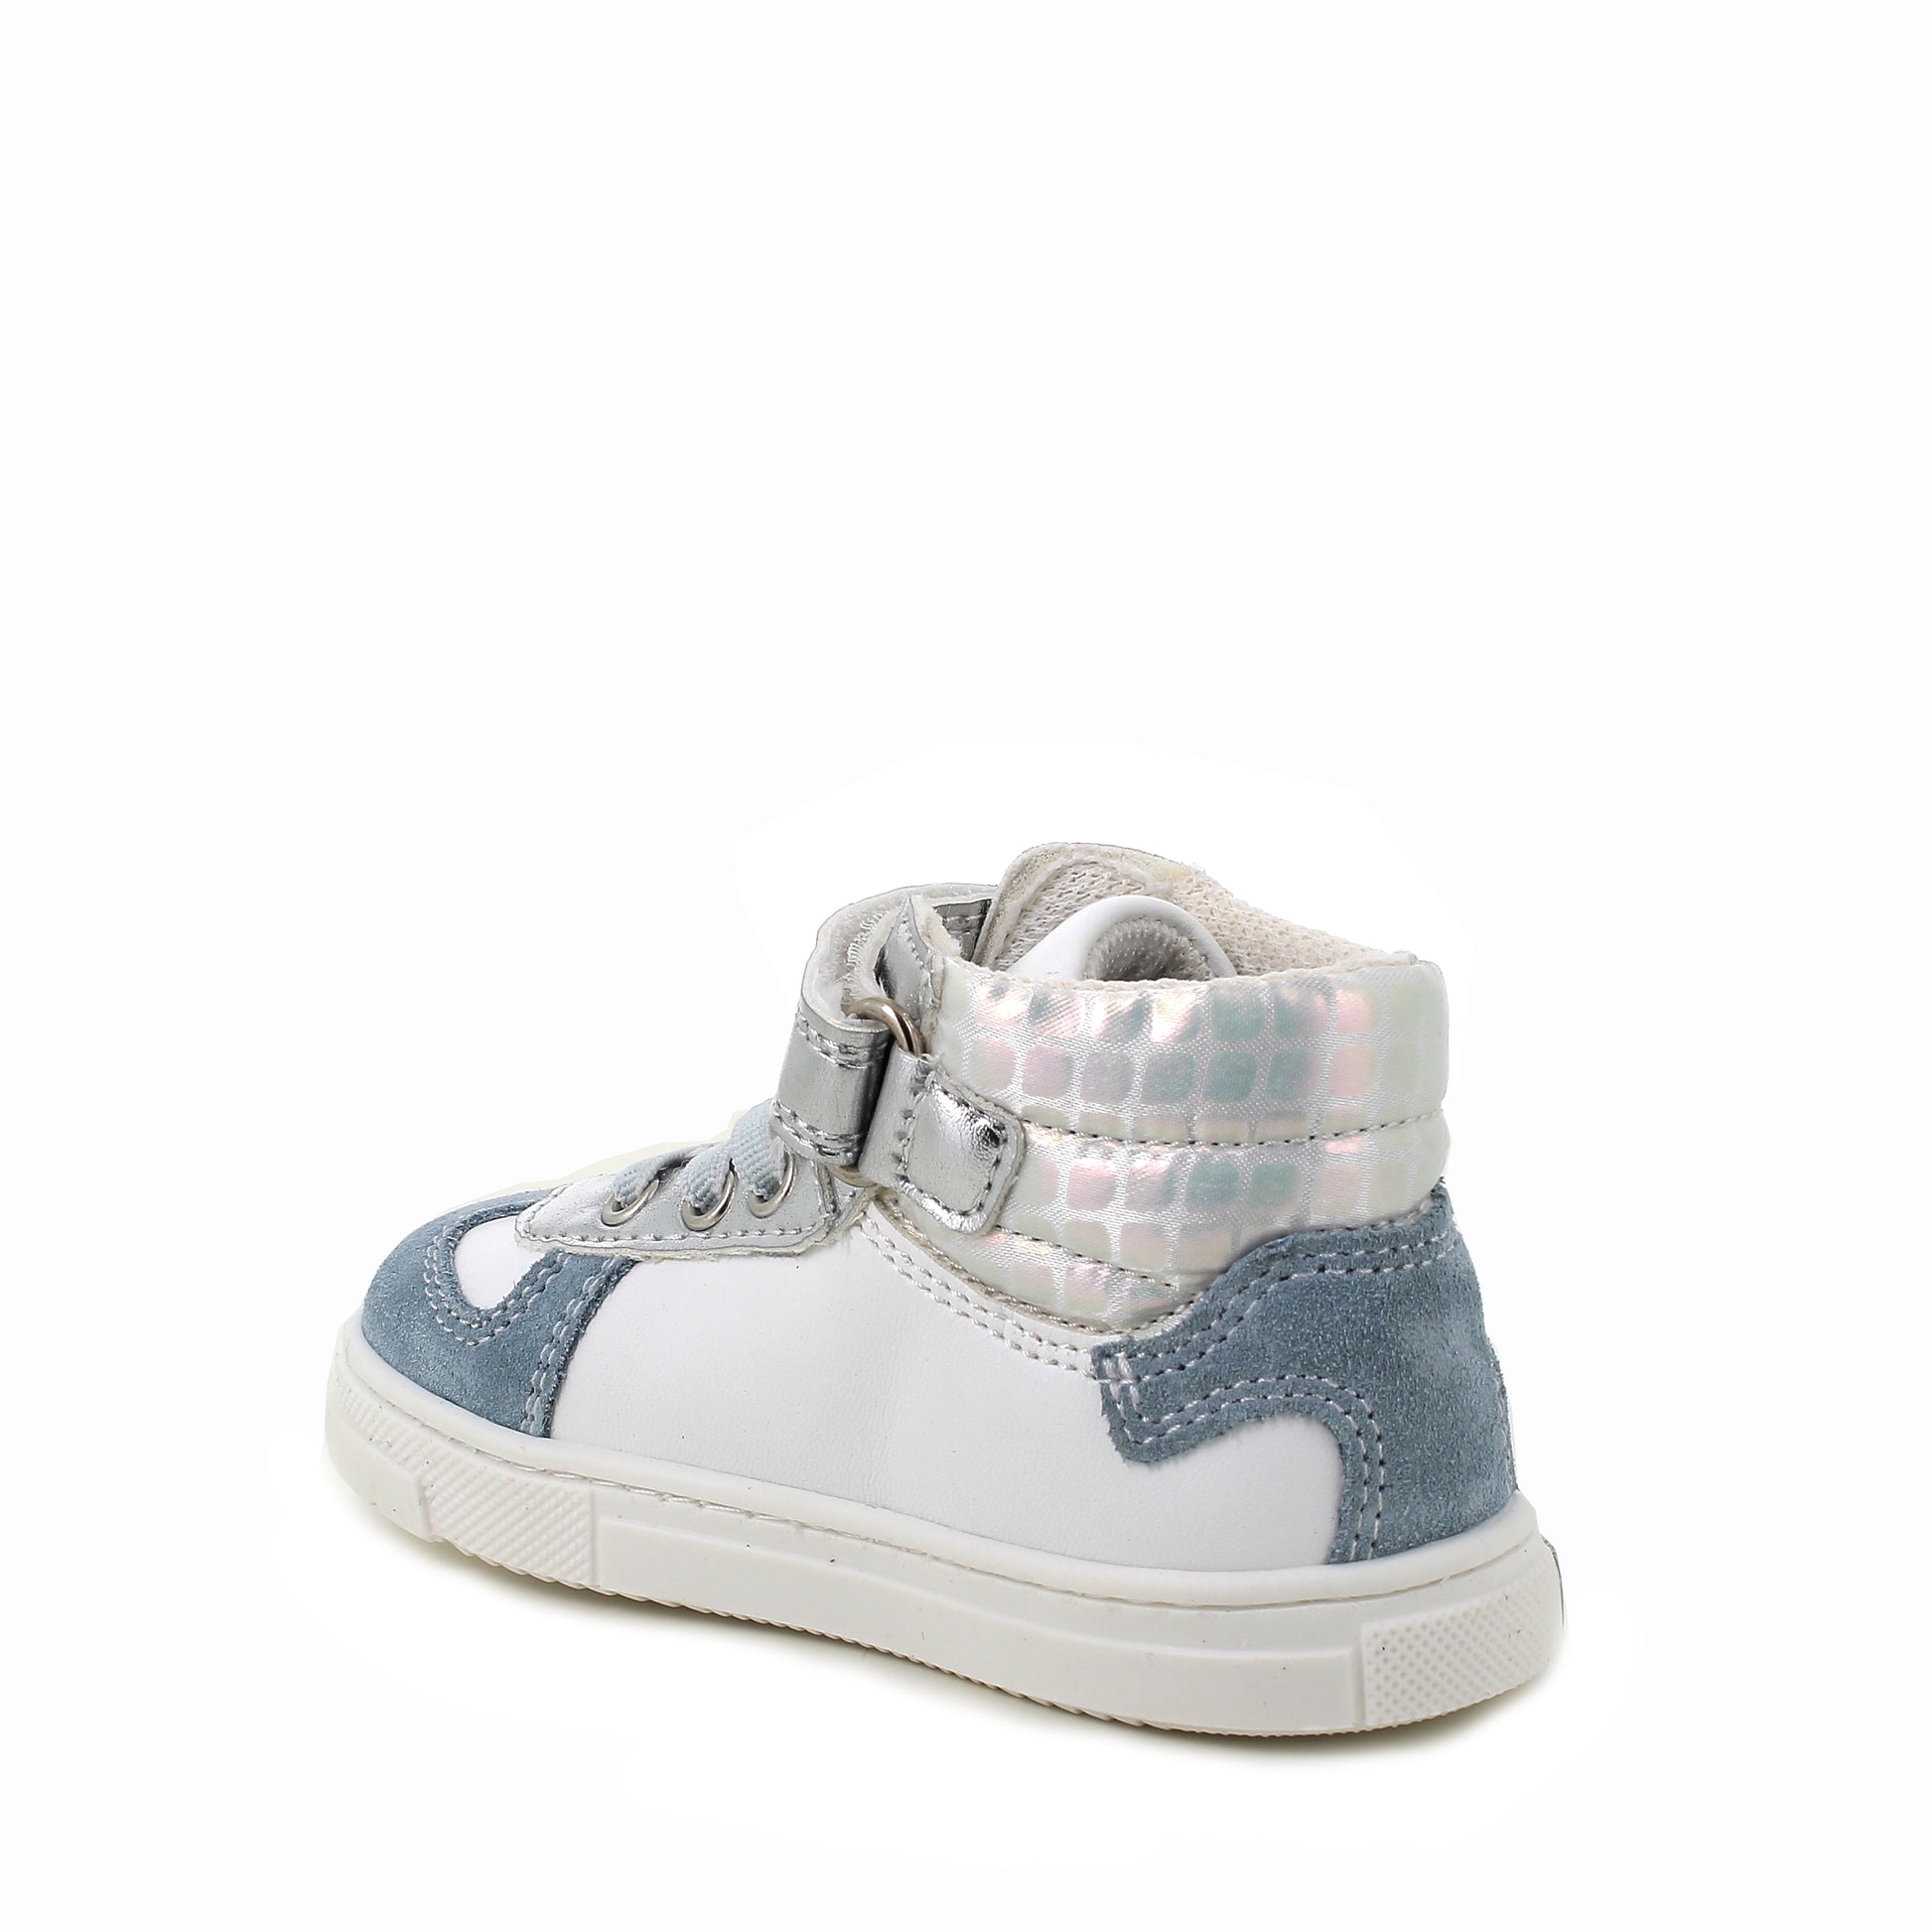 A girls Hi-Top boot by Primigi, style 4904500 Baby Glitter, in white, silver and blue leather with glitter trim, faux laces and velcro fastening. Left angled view.